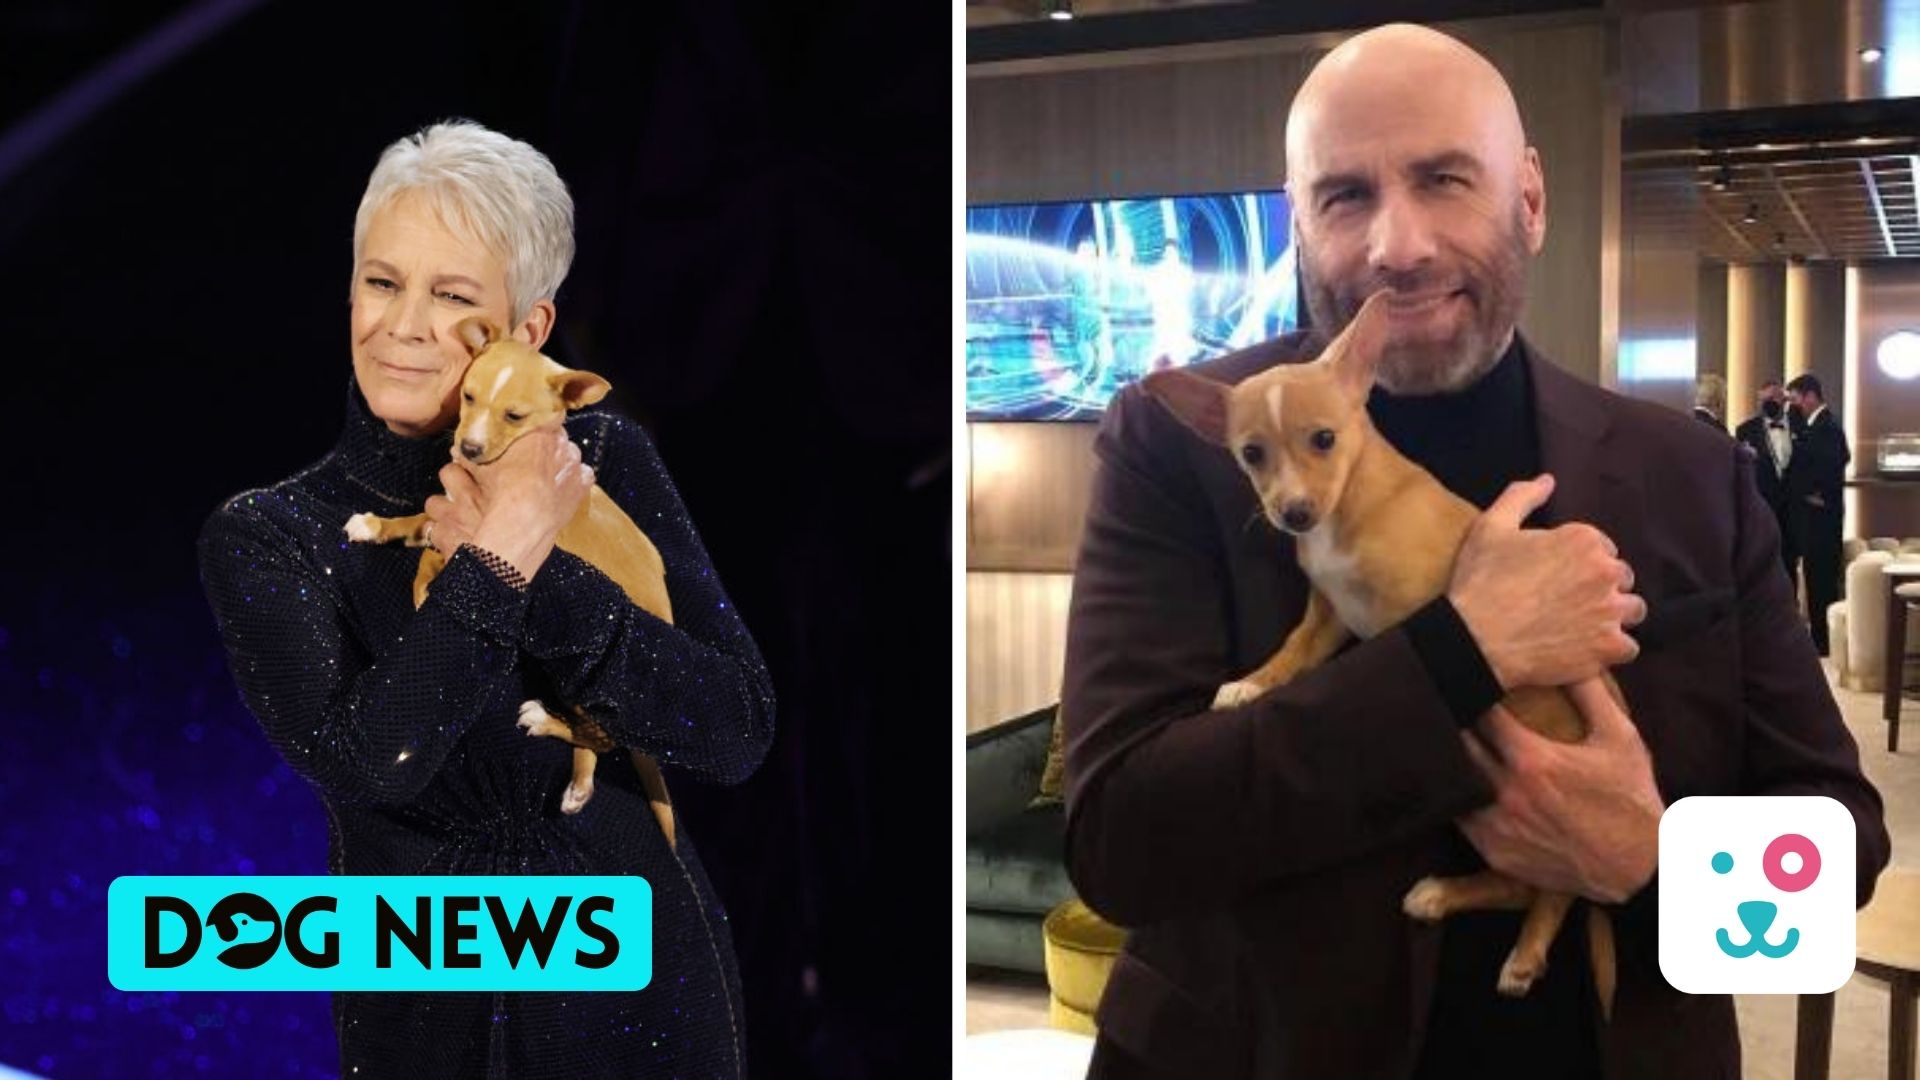 Rescue dog seen in Oscars Betty White tribute gets adopted by John Travolta